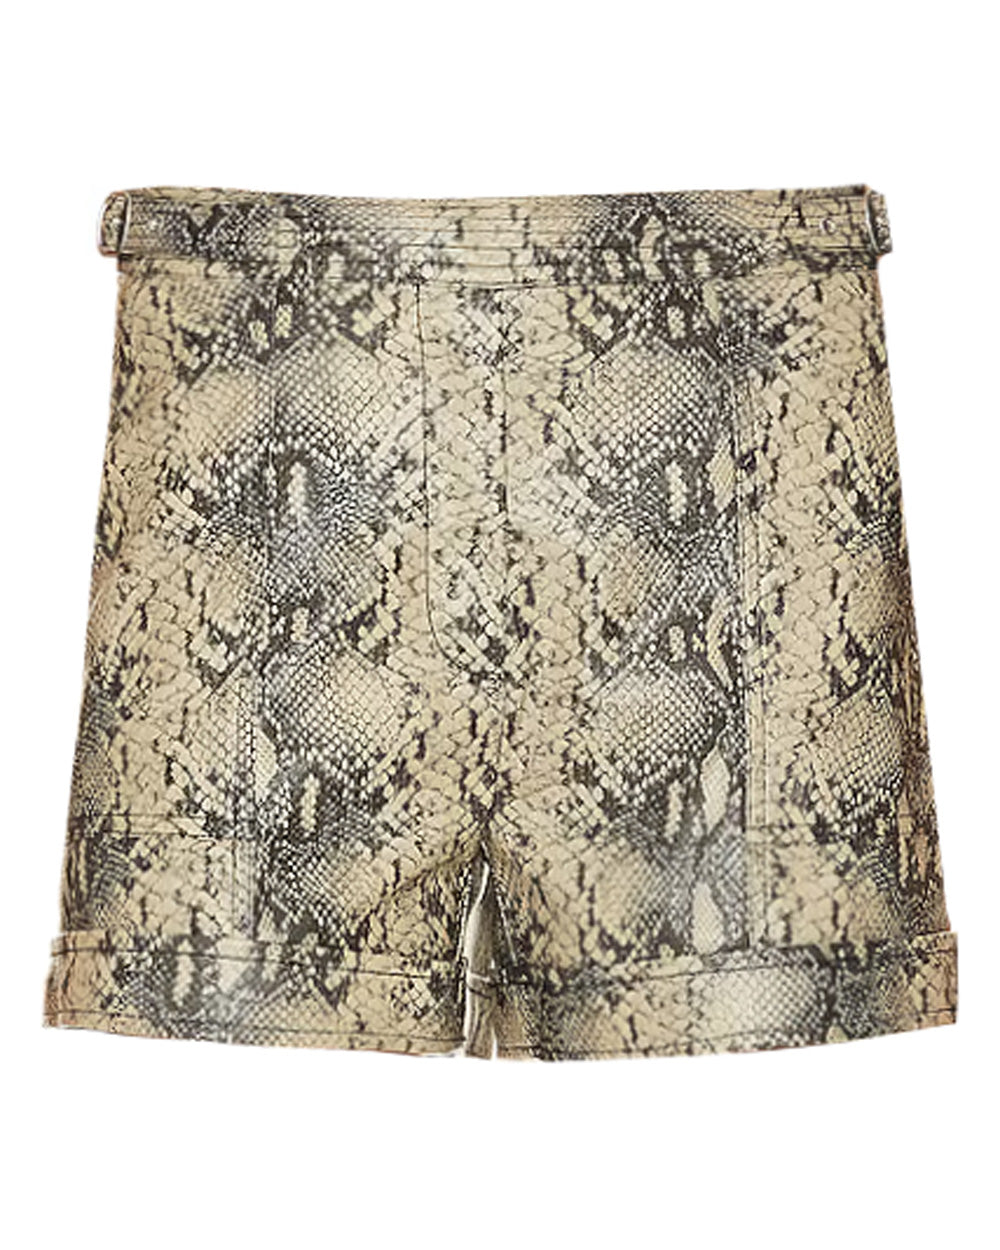 Macadamia Python Vegan Leather Chace Belted Short